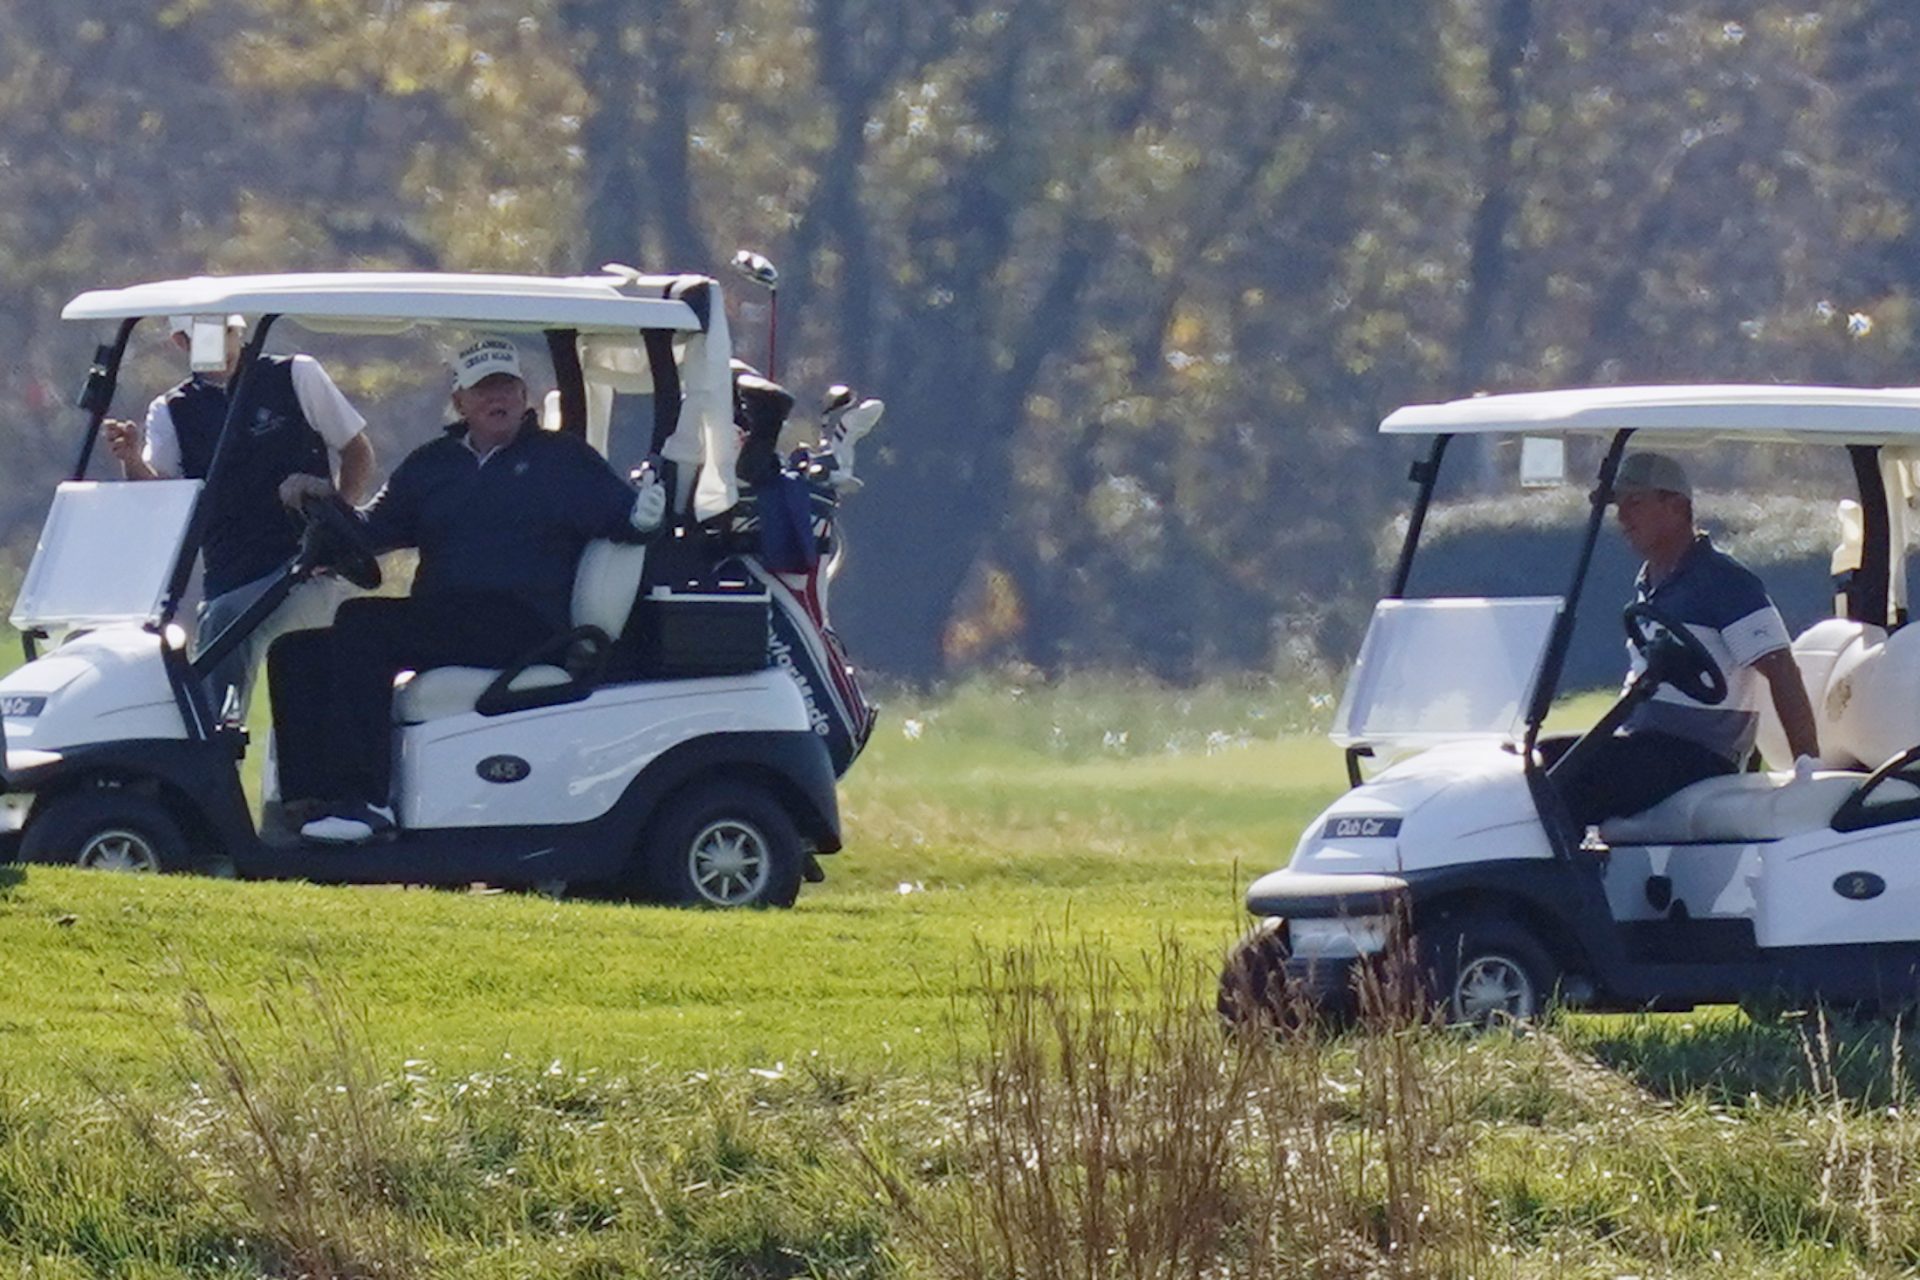 President Donald Trump participates in a round of golf at the Trump National Golf Course on Saturday, Nov. 7, 2020, in Sterling, Va.